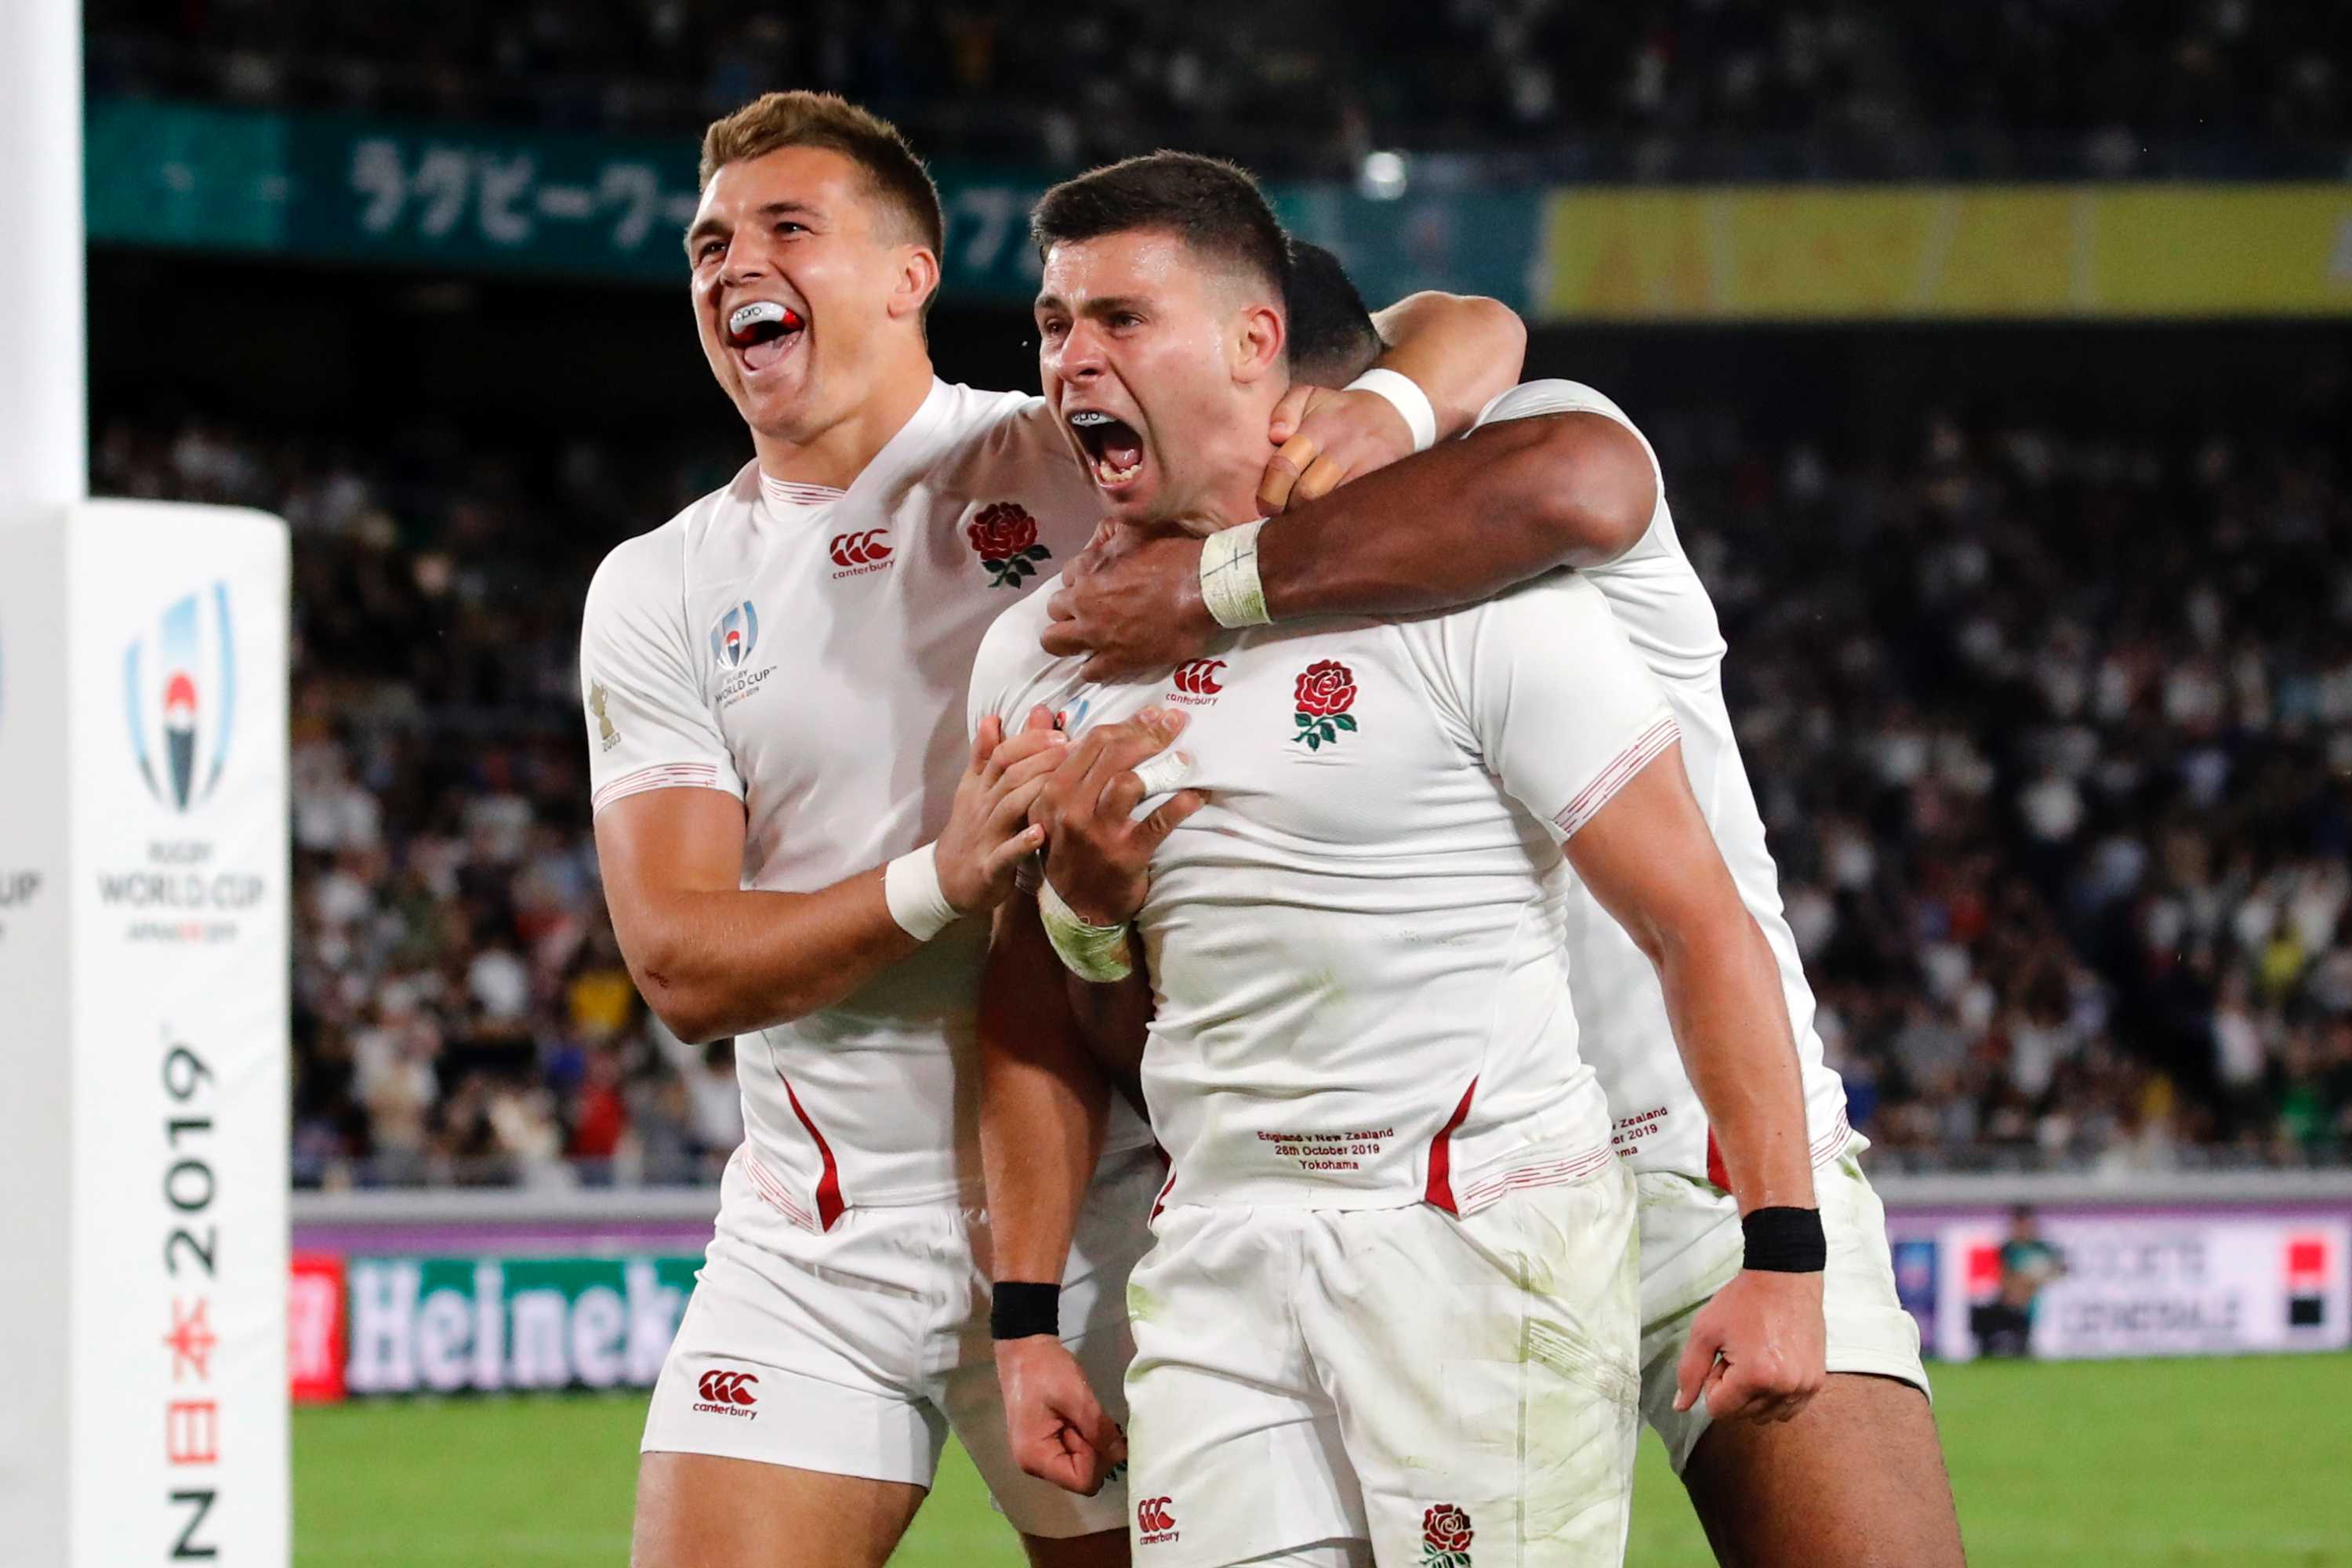 All Blacks Rugby World Cup semi-final loss to England elicits mixed reactions around the world